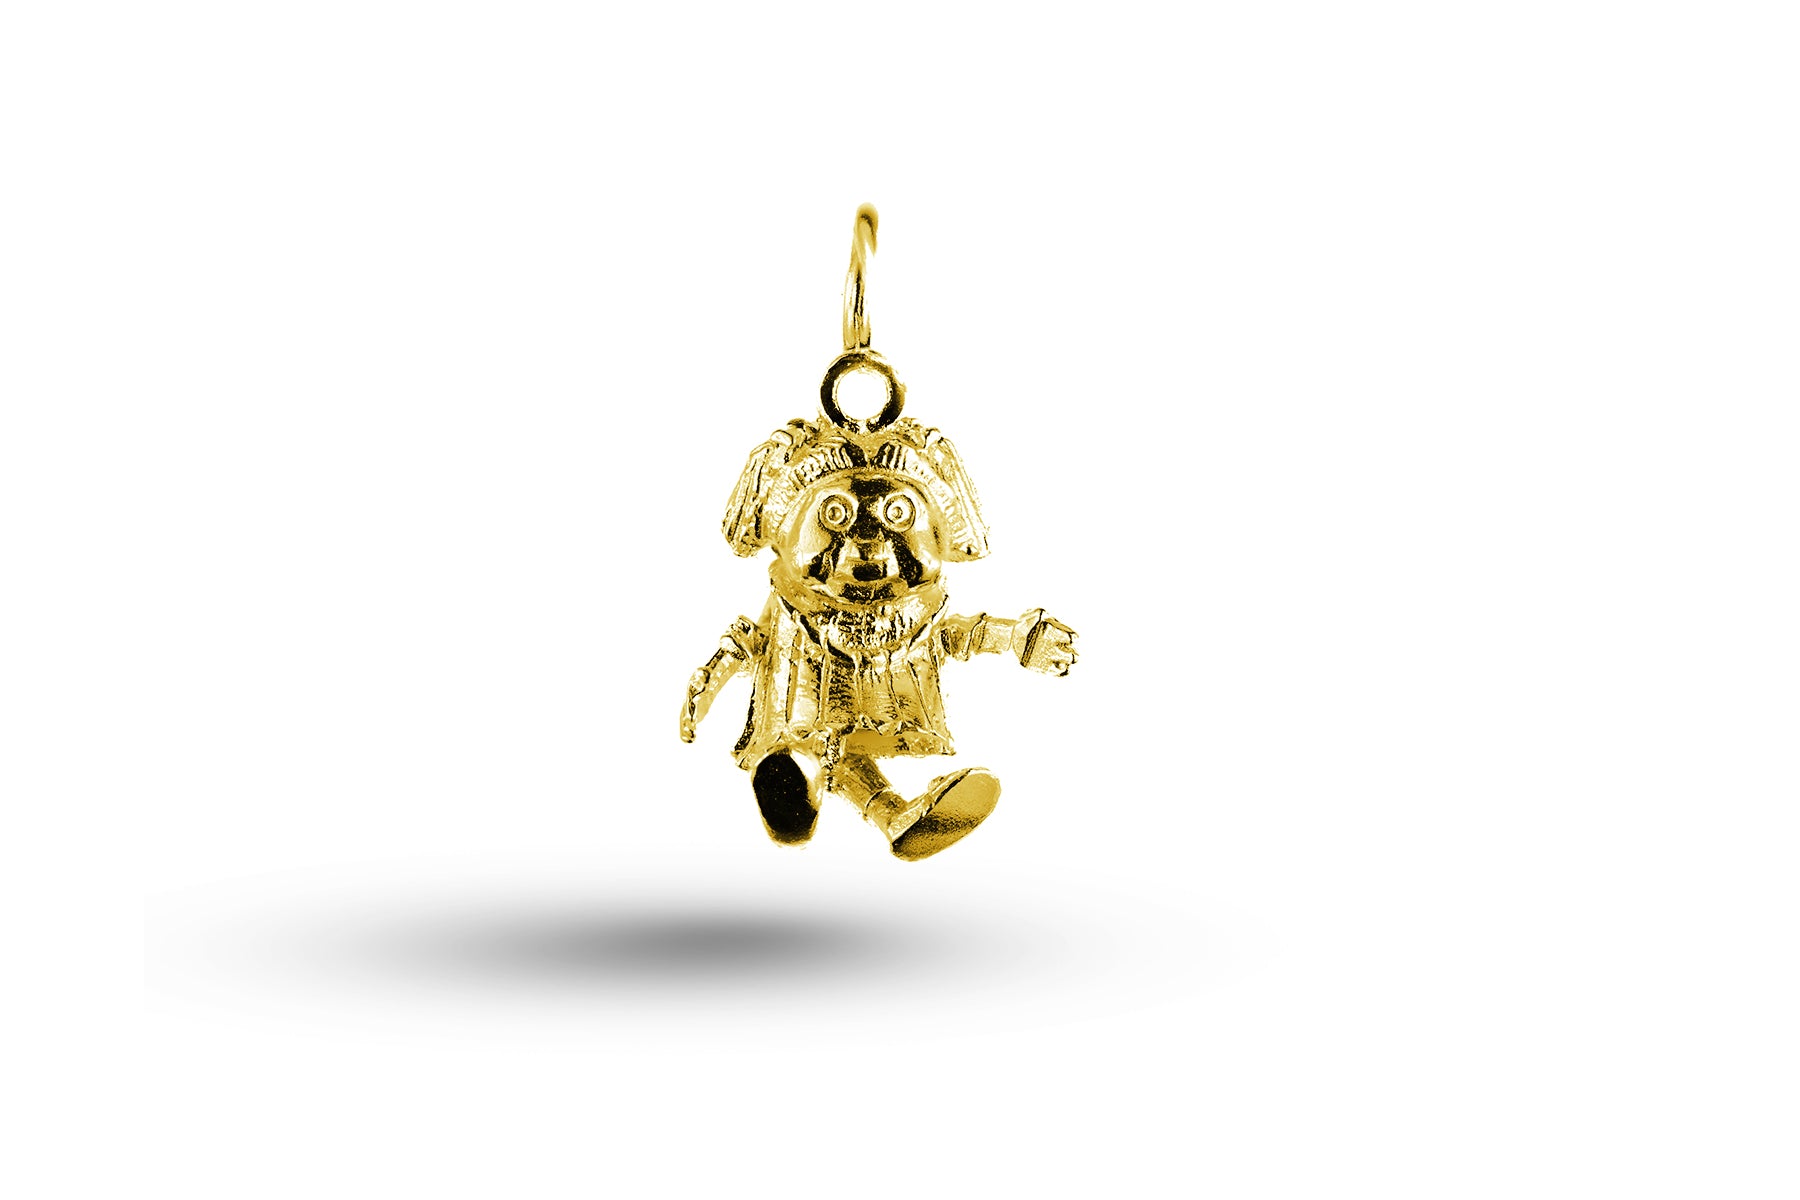 Luxury yellow gold baby doll charm.